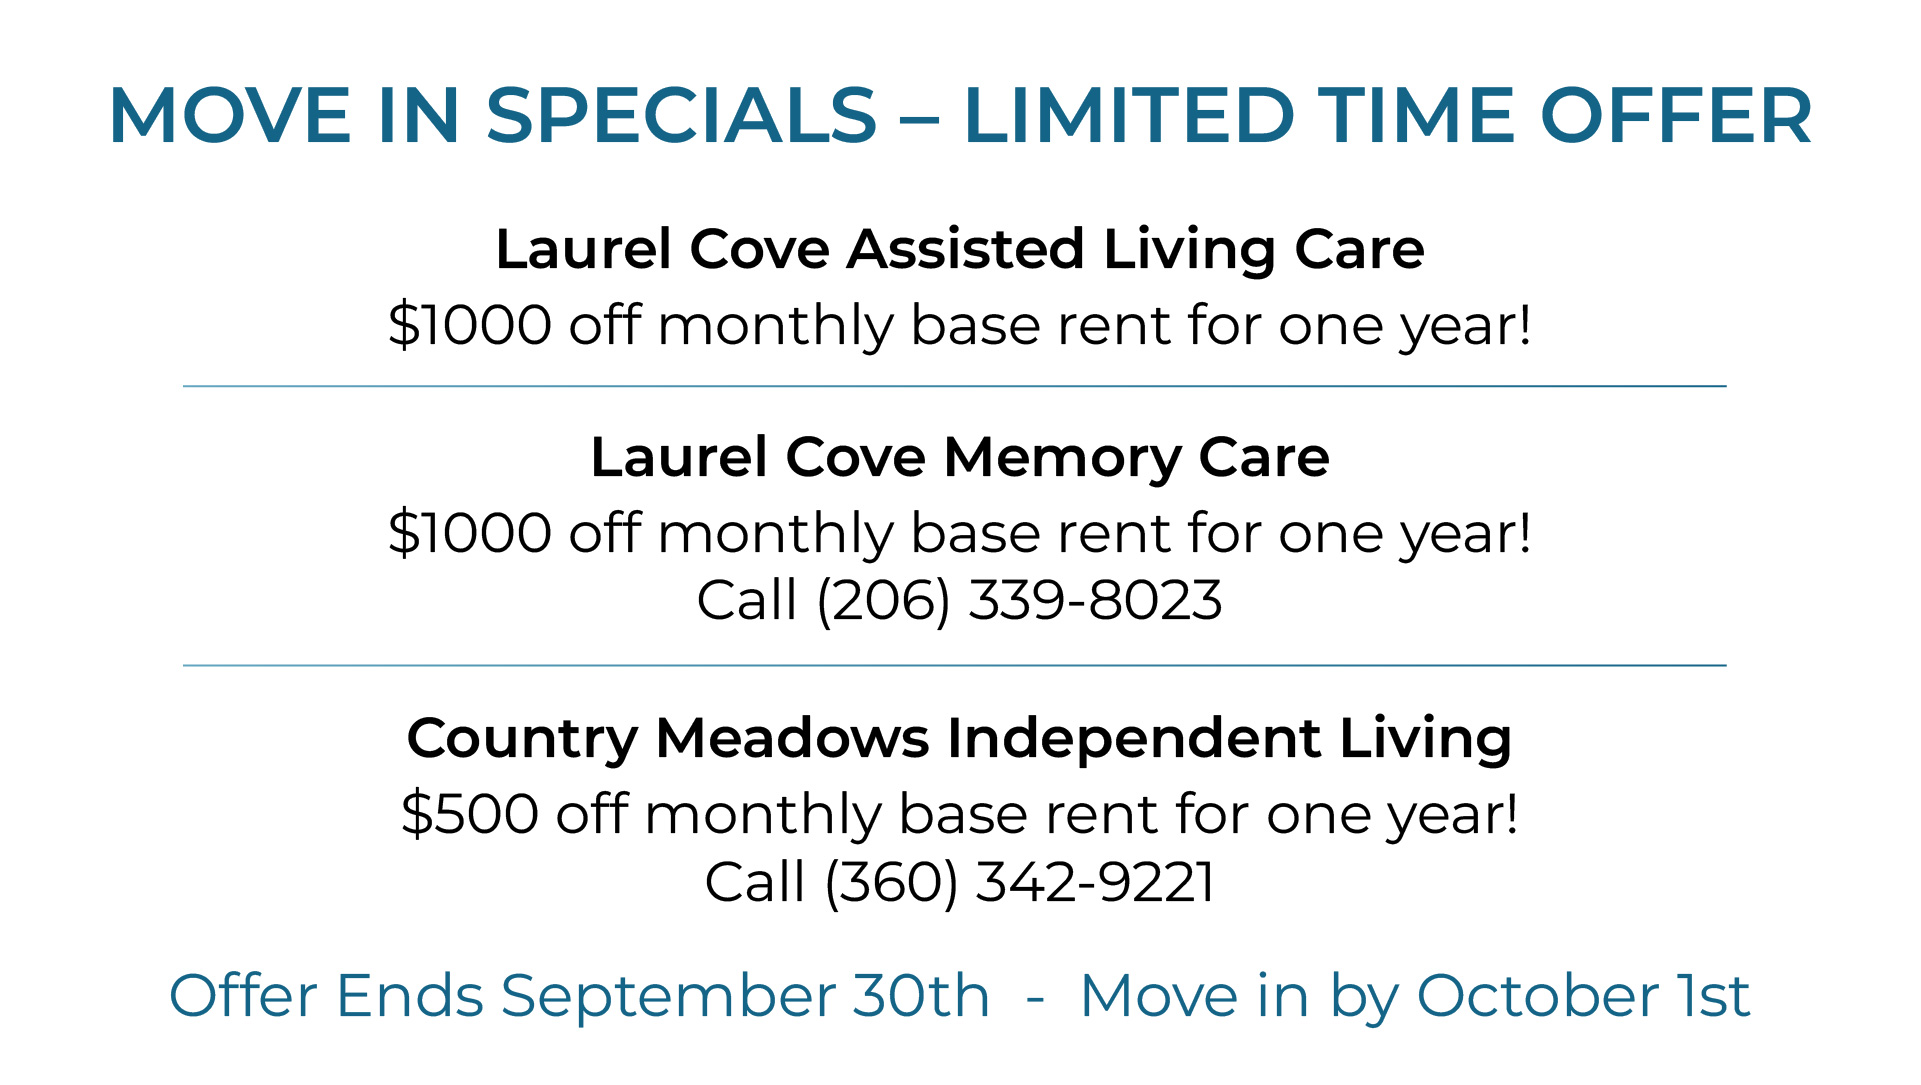 Move In Specials. Laurel Cove Assisted Living Care - $1000 off monthly rate for one year. Laurel Cove Memory Care - $1000 off monthly rate for one year. Offer ends September 30th, Move in October 1st. Country Meadows Independent Living - $500 off monthly base rent for one year.